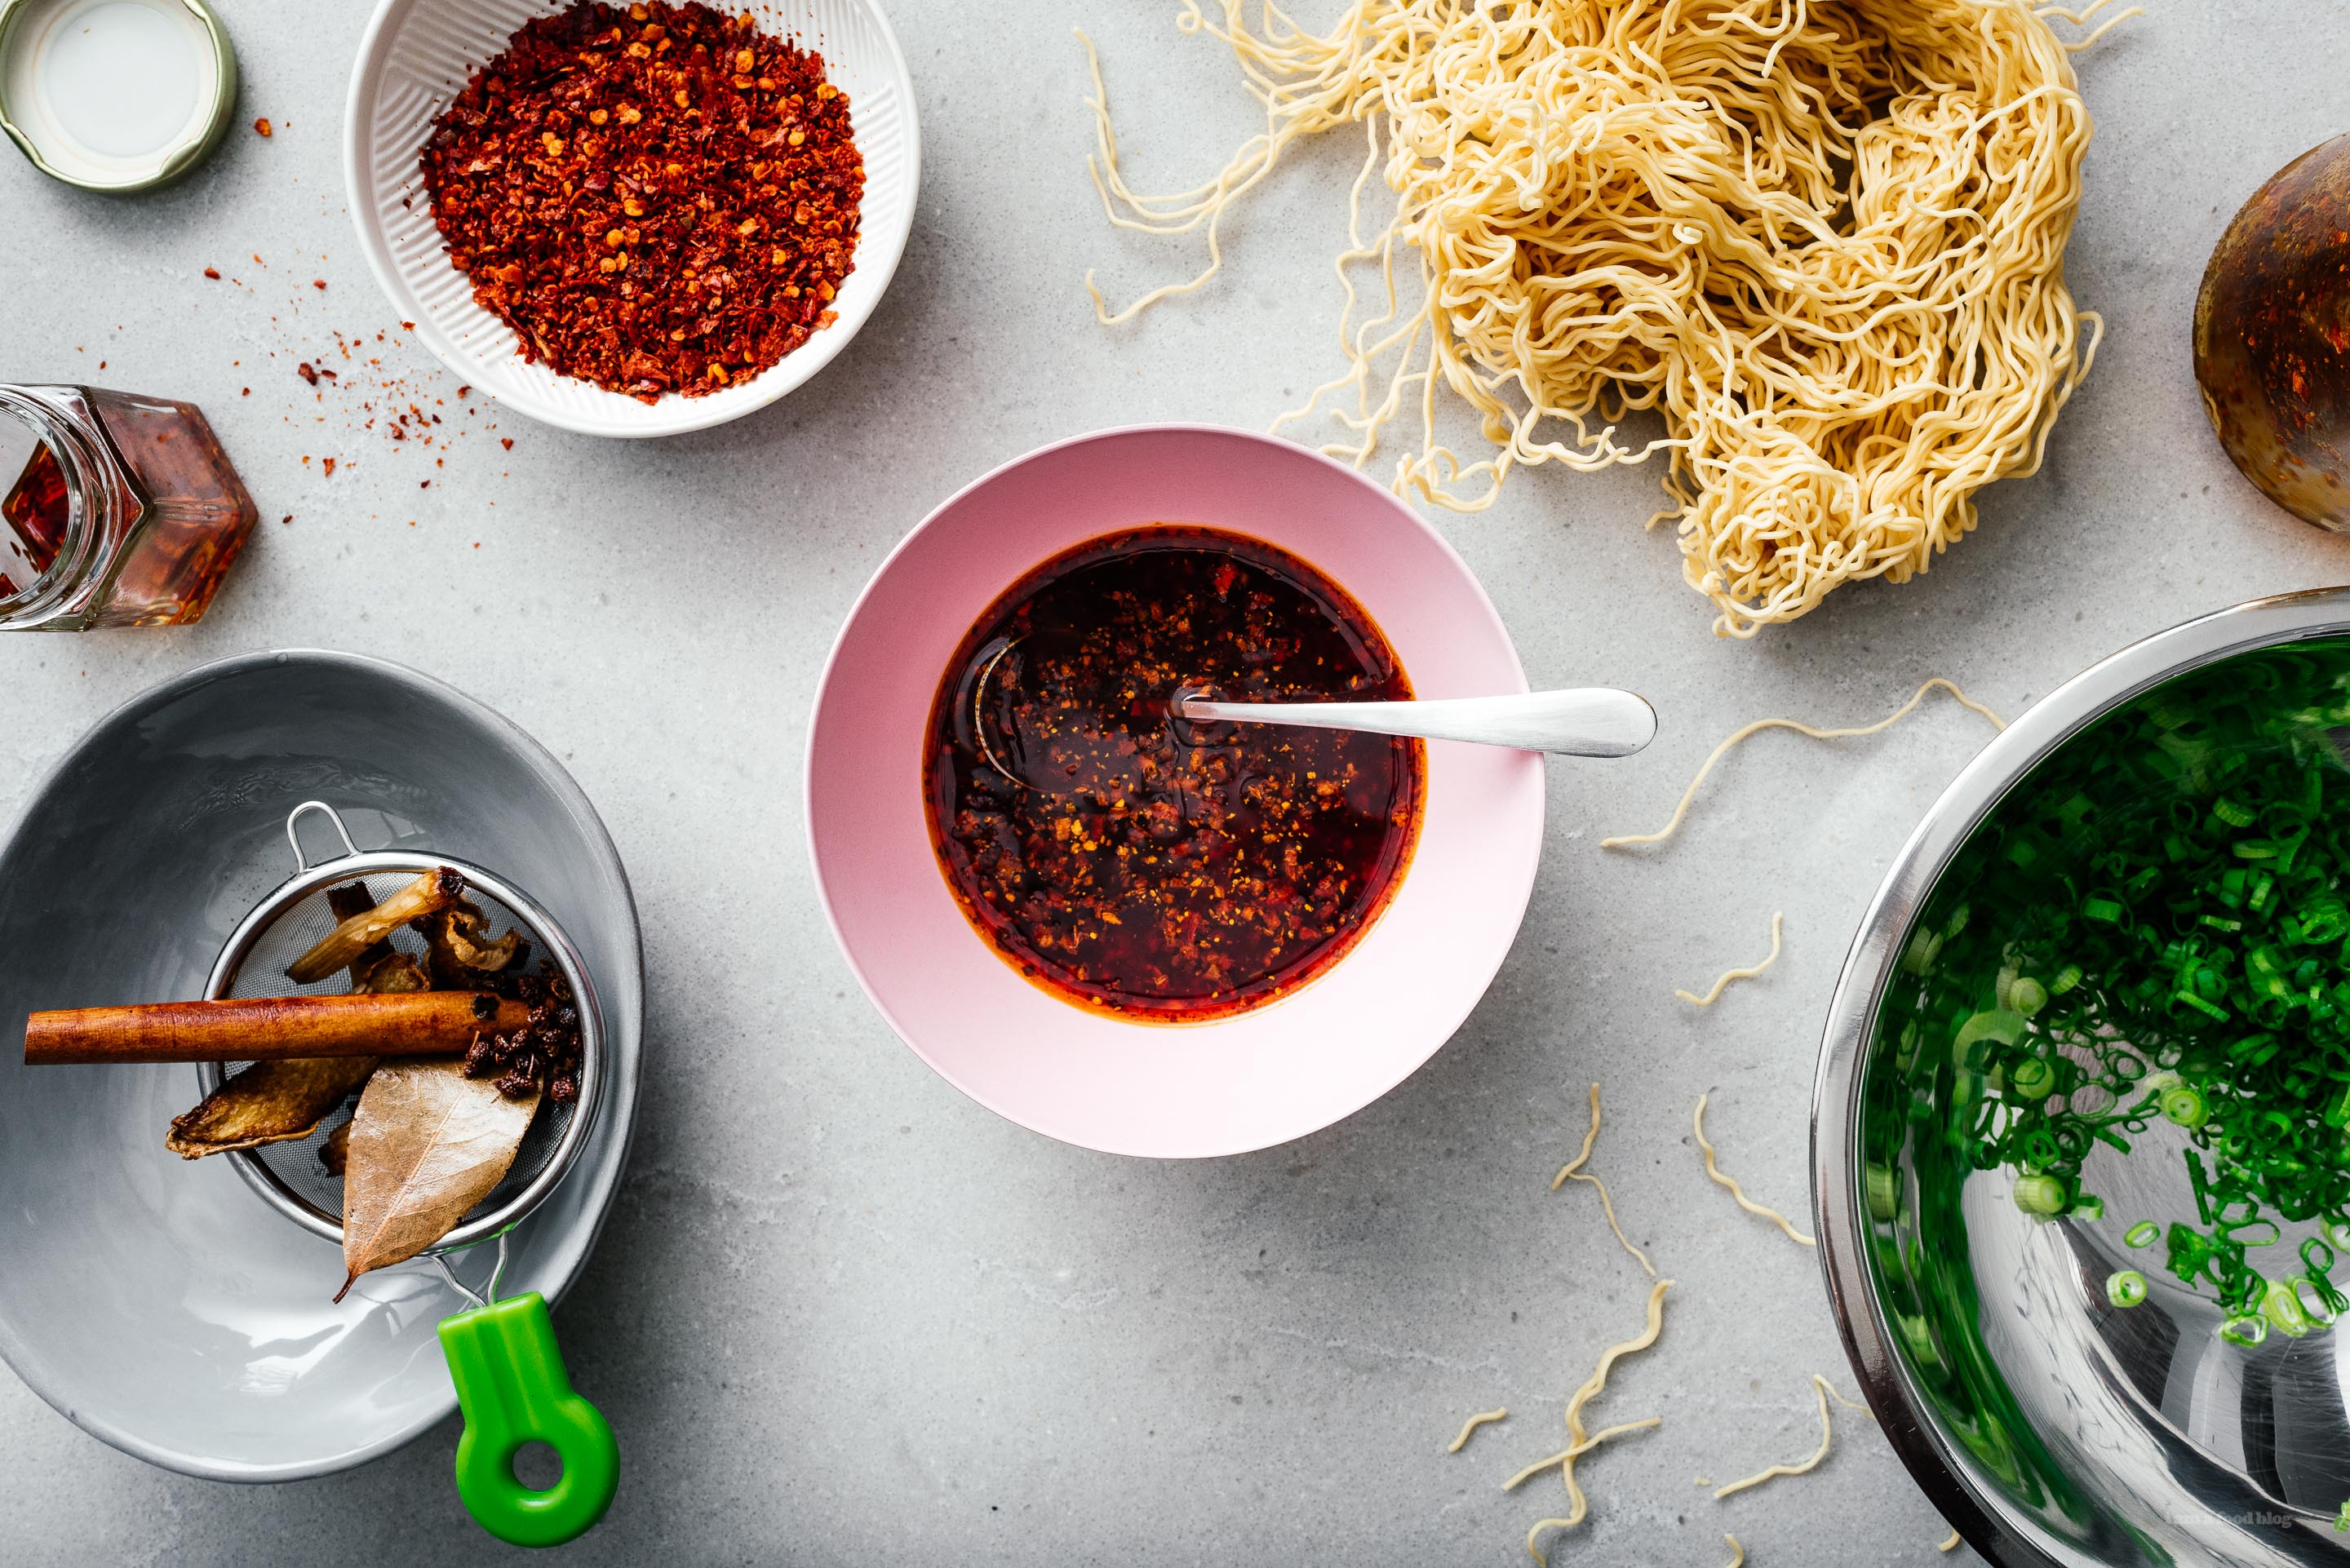 How to Make Authentic Chinese Spicy Hot Chili Oil